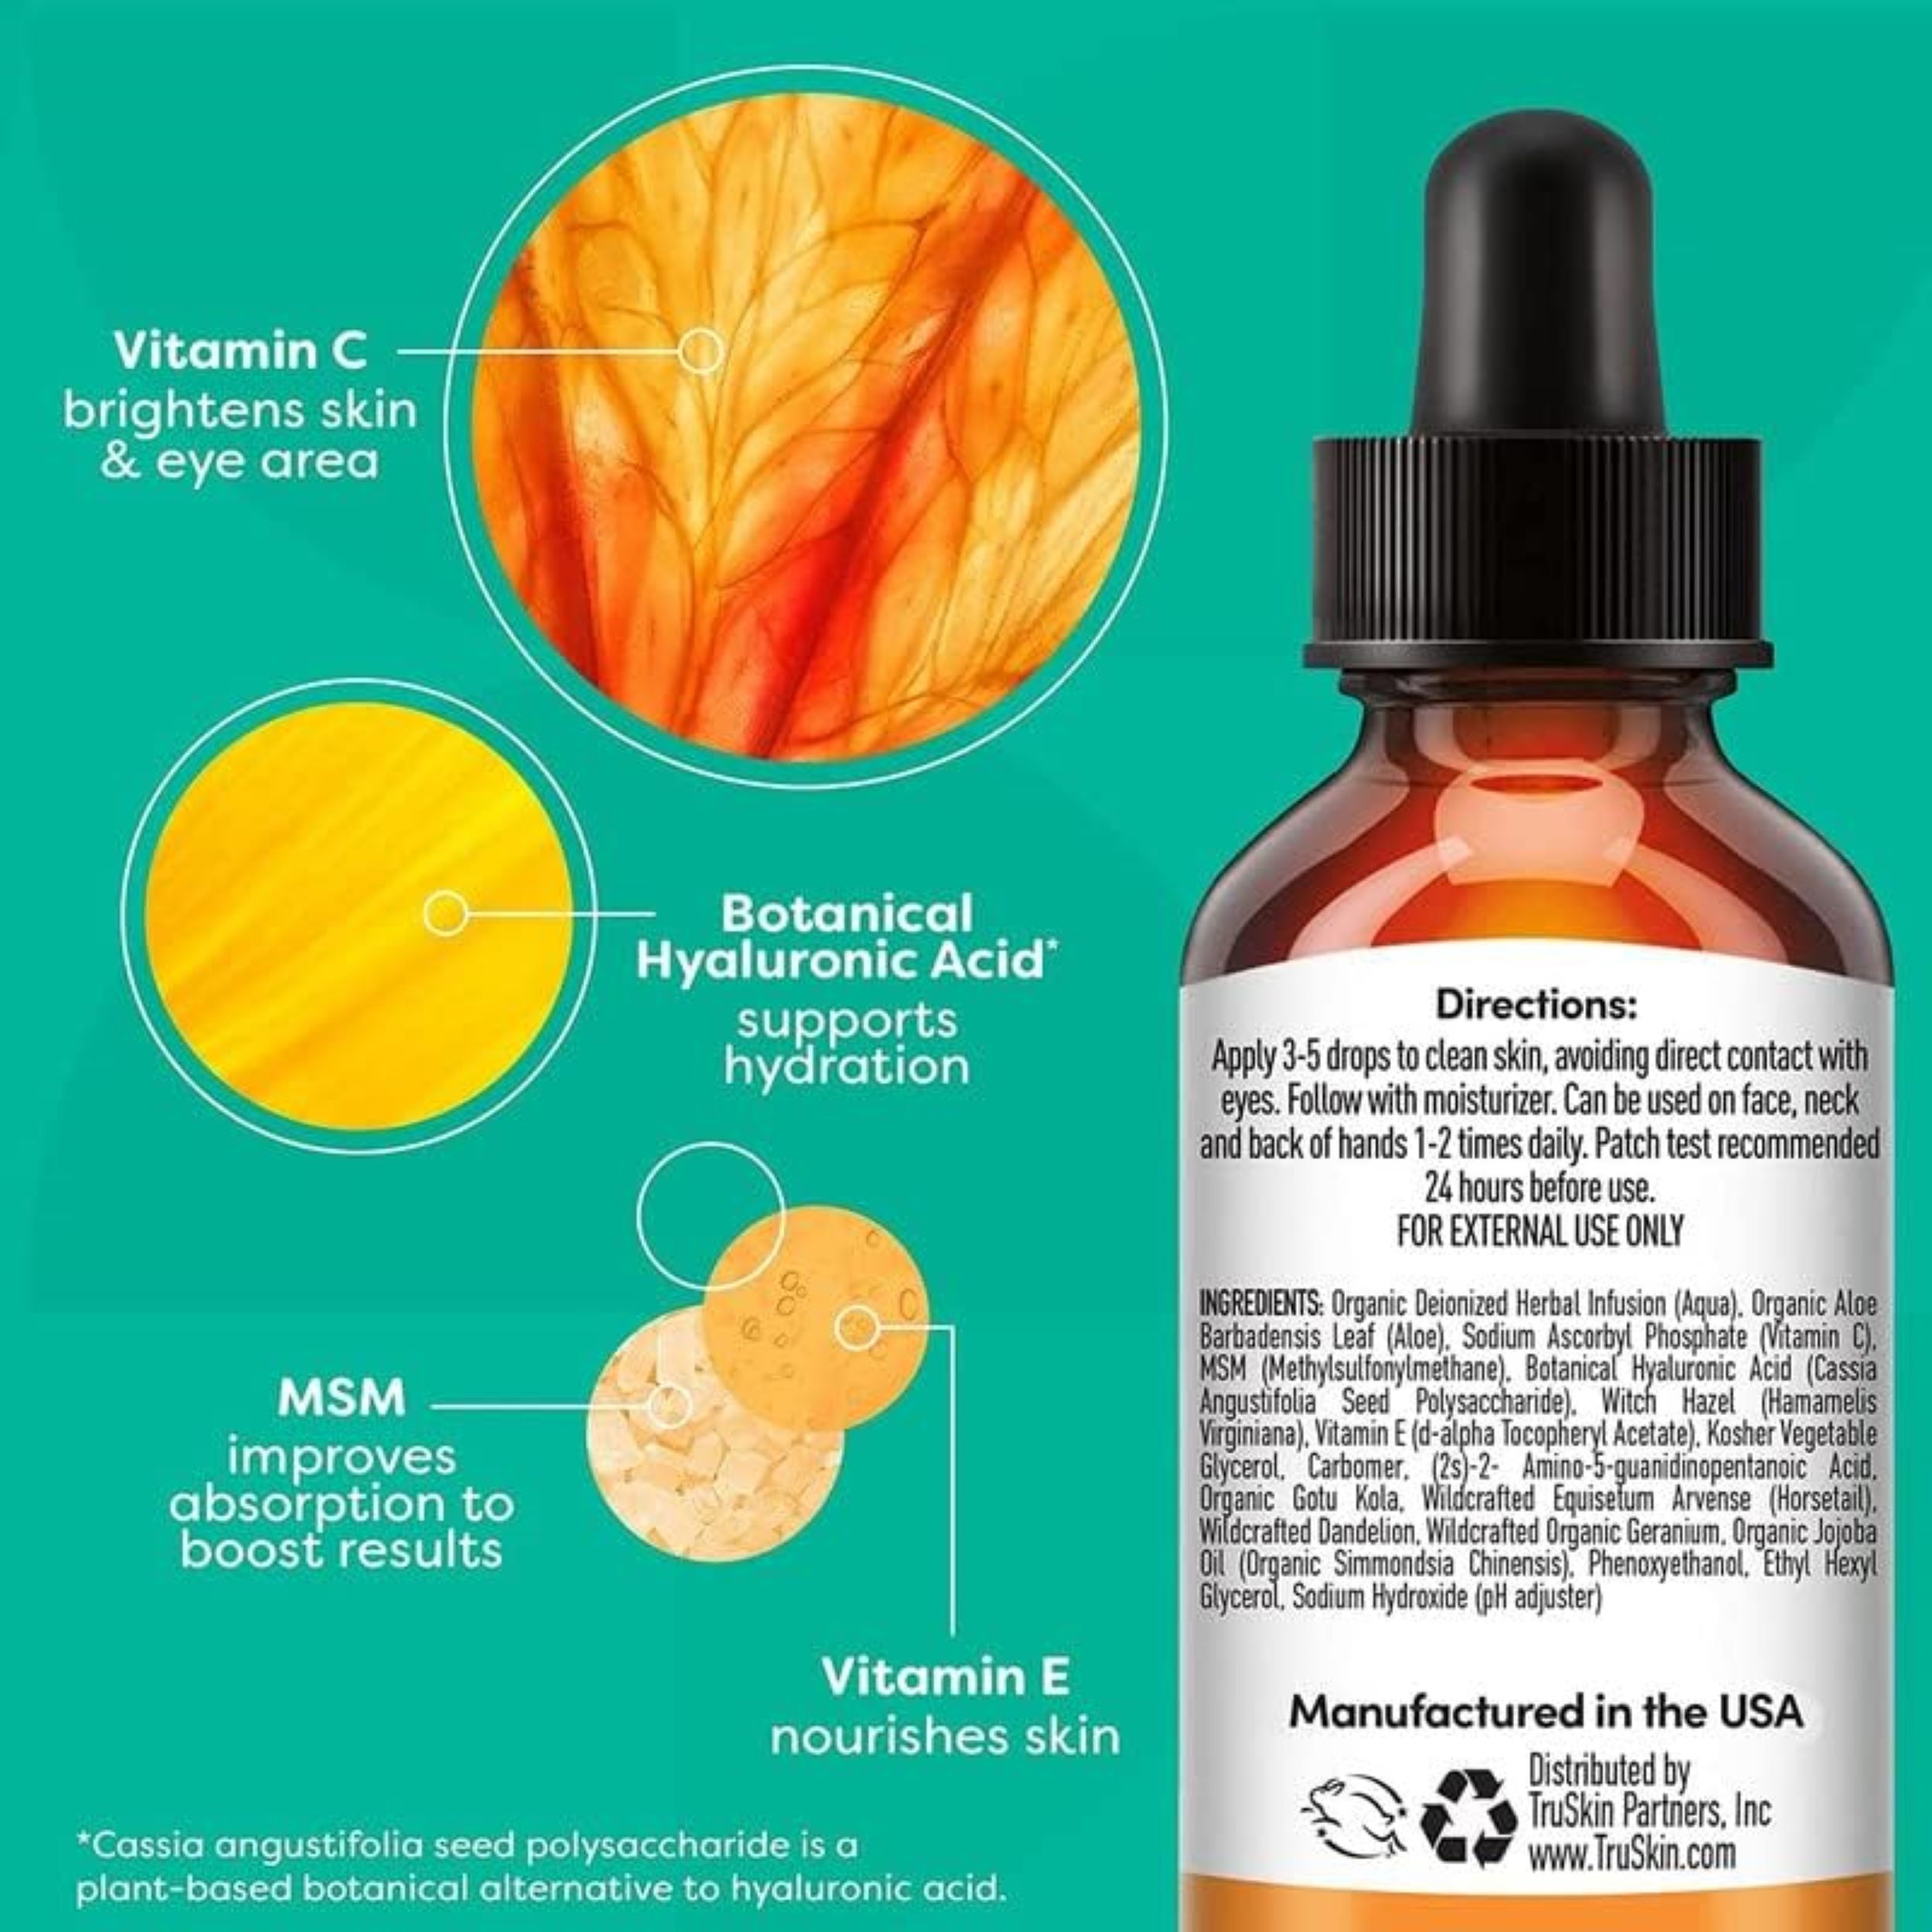 TruSkin Vitamin C Serum for Face – Anti Aging Face Serum with Vitamin C, Hyaluronic Acid, All Skin Types, 1 fl oz - image 4 of 12